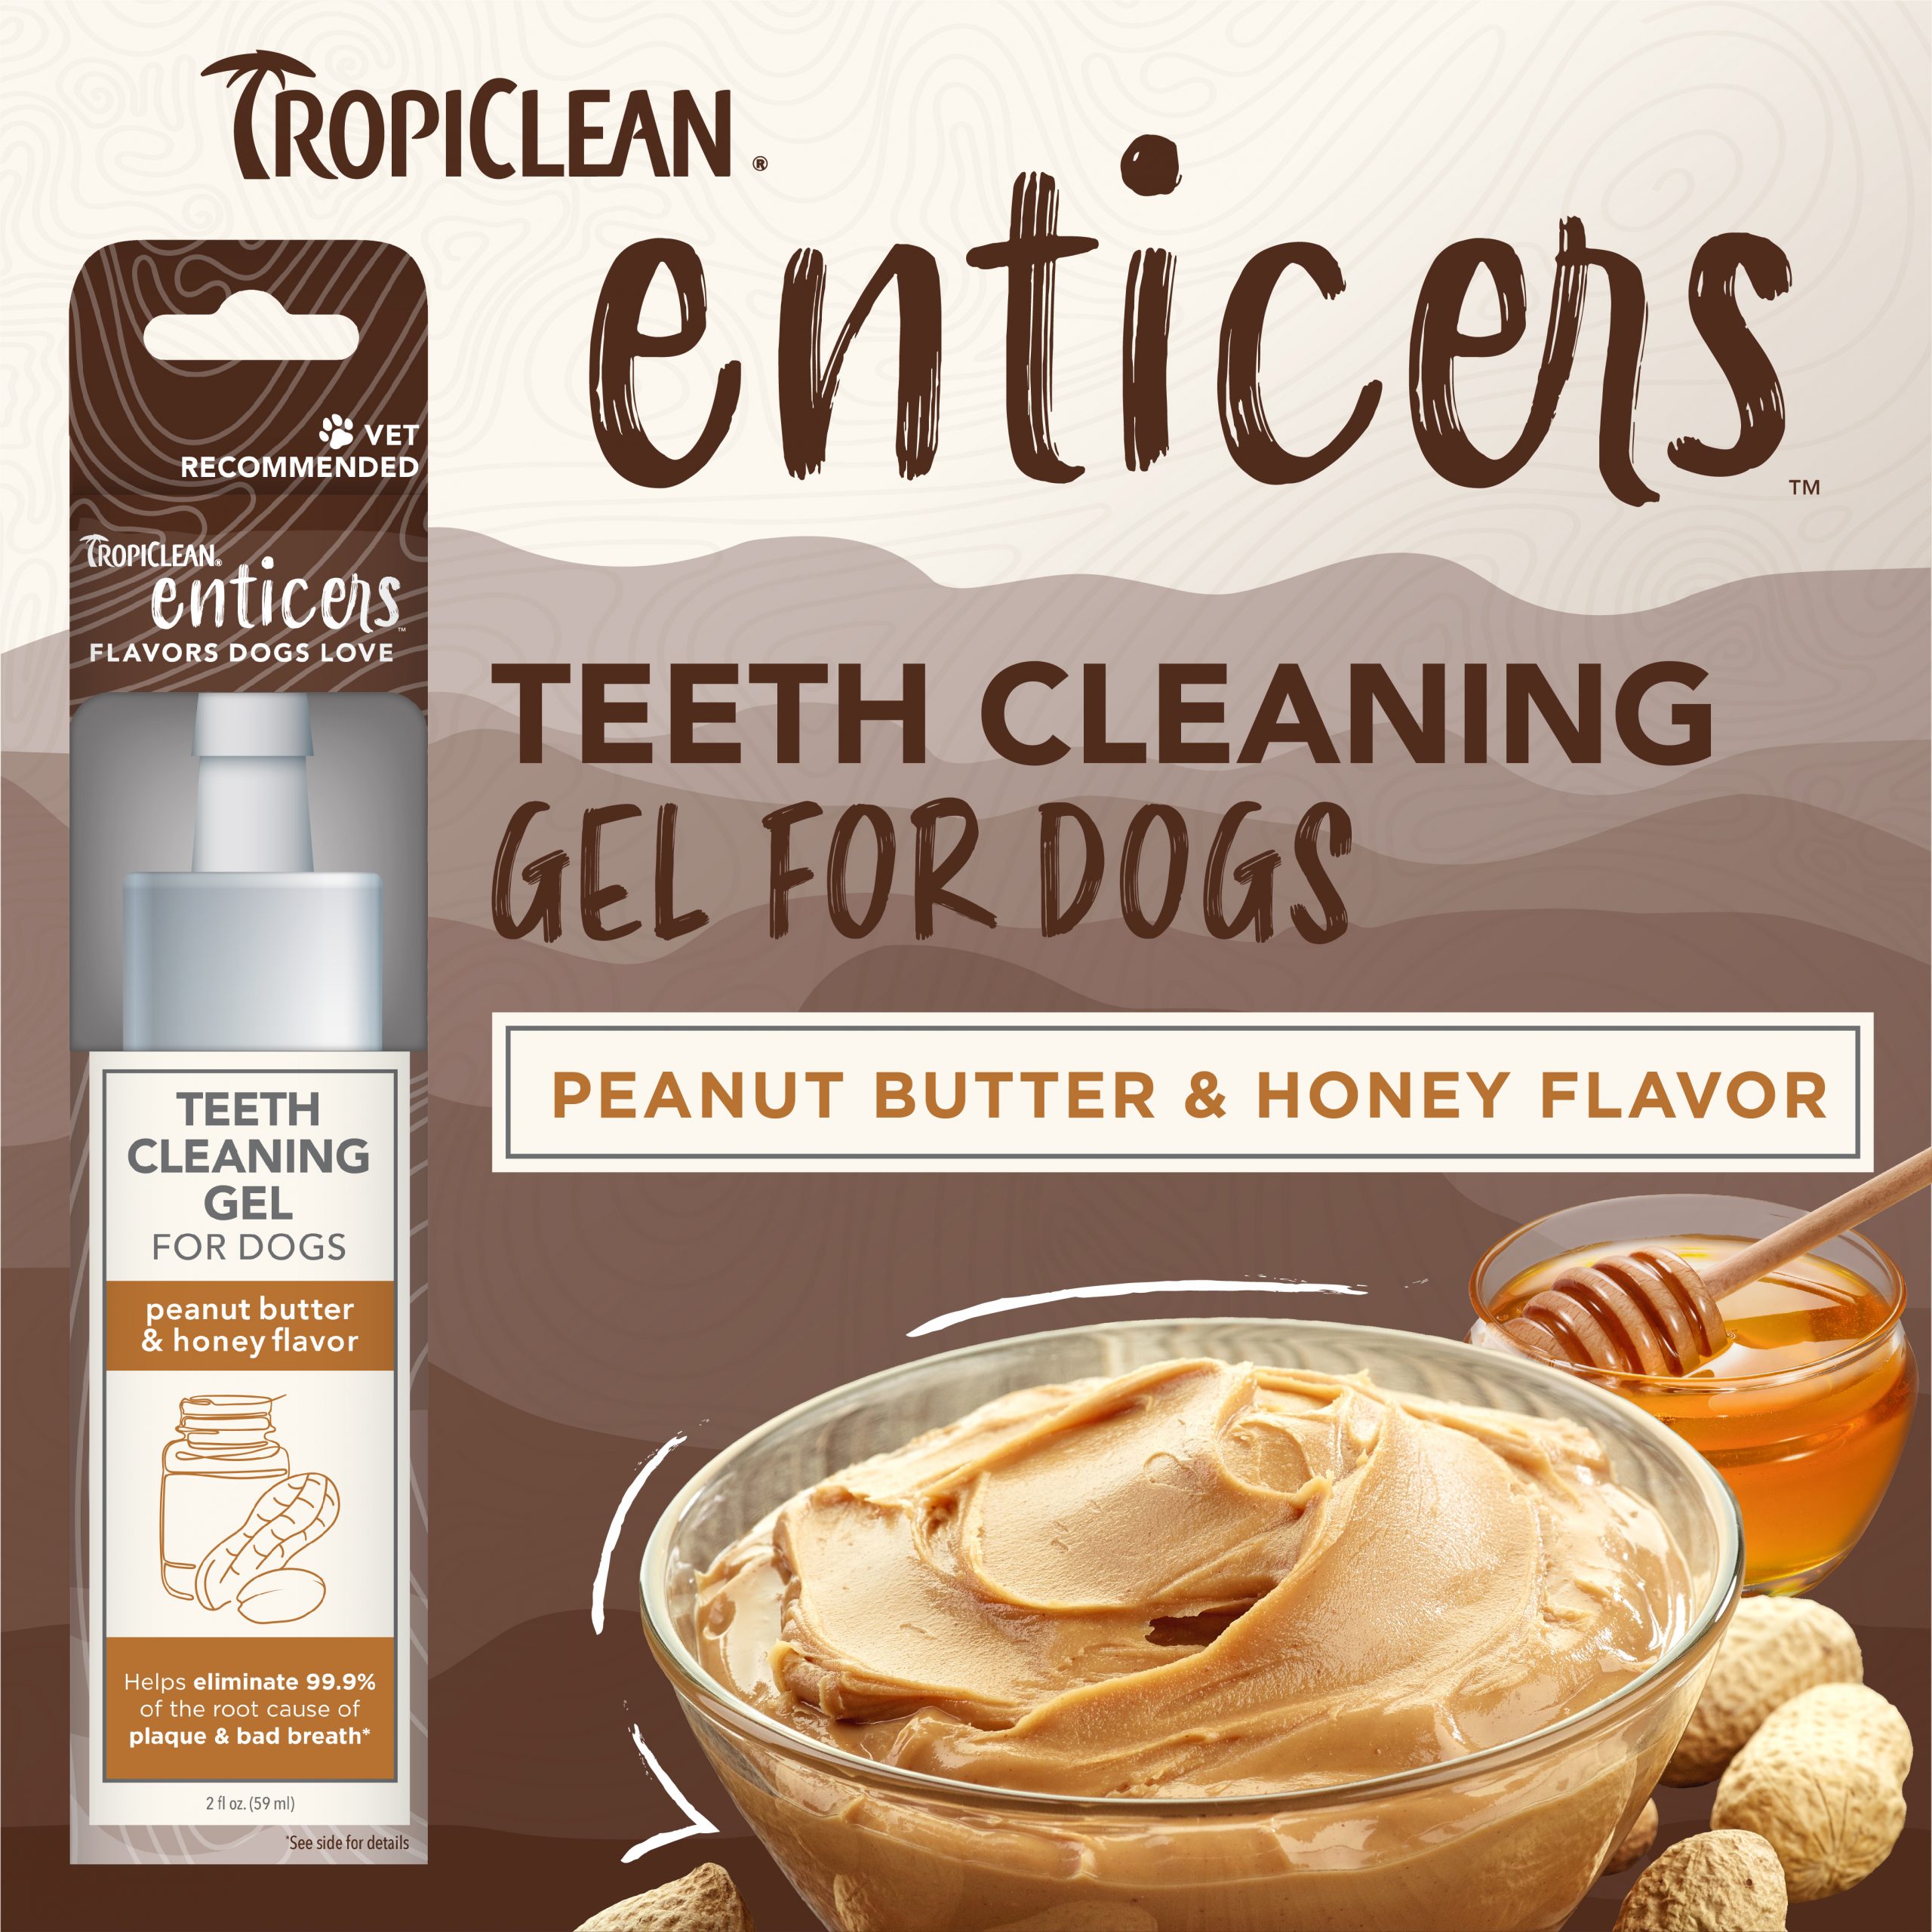 Teeth Cleaning Gel for Dogs – Peanut Butter & Honey Flavor